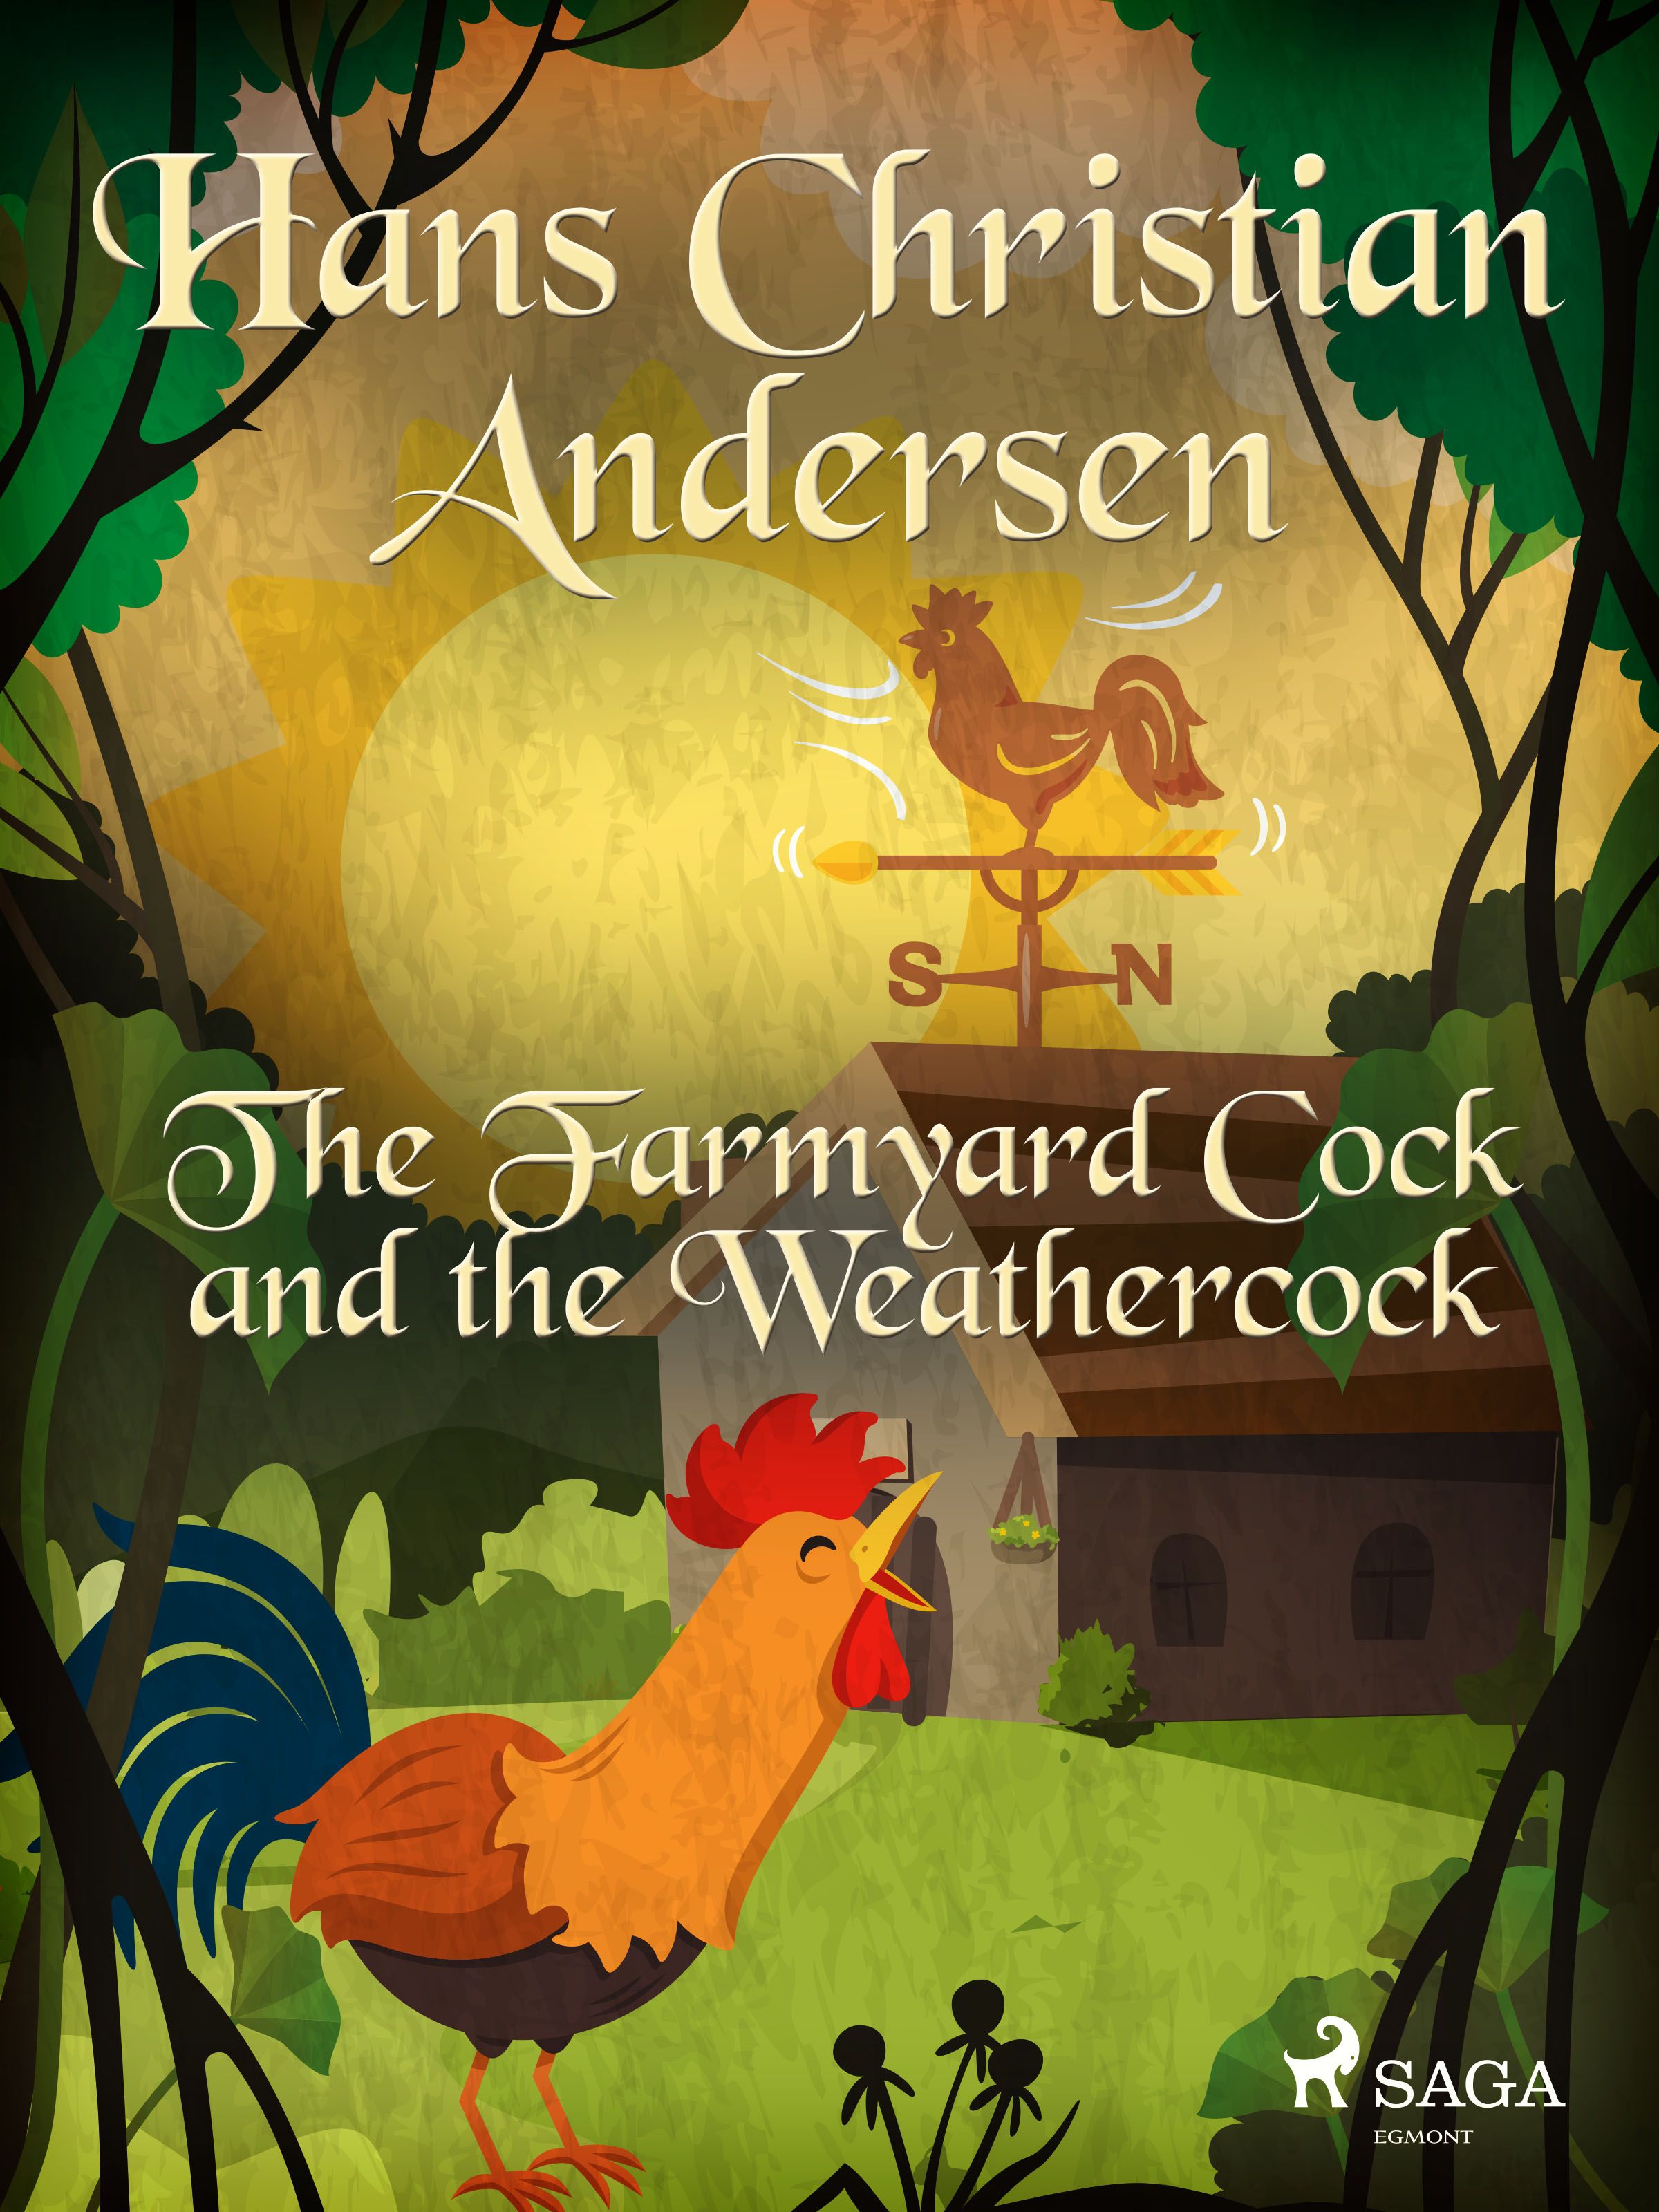 The Farmyard Cock and the Weathercock , eBook by Hans Christian Andersen